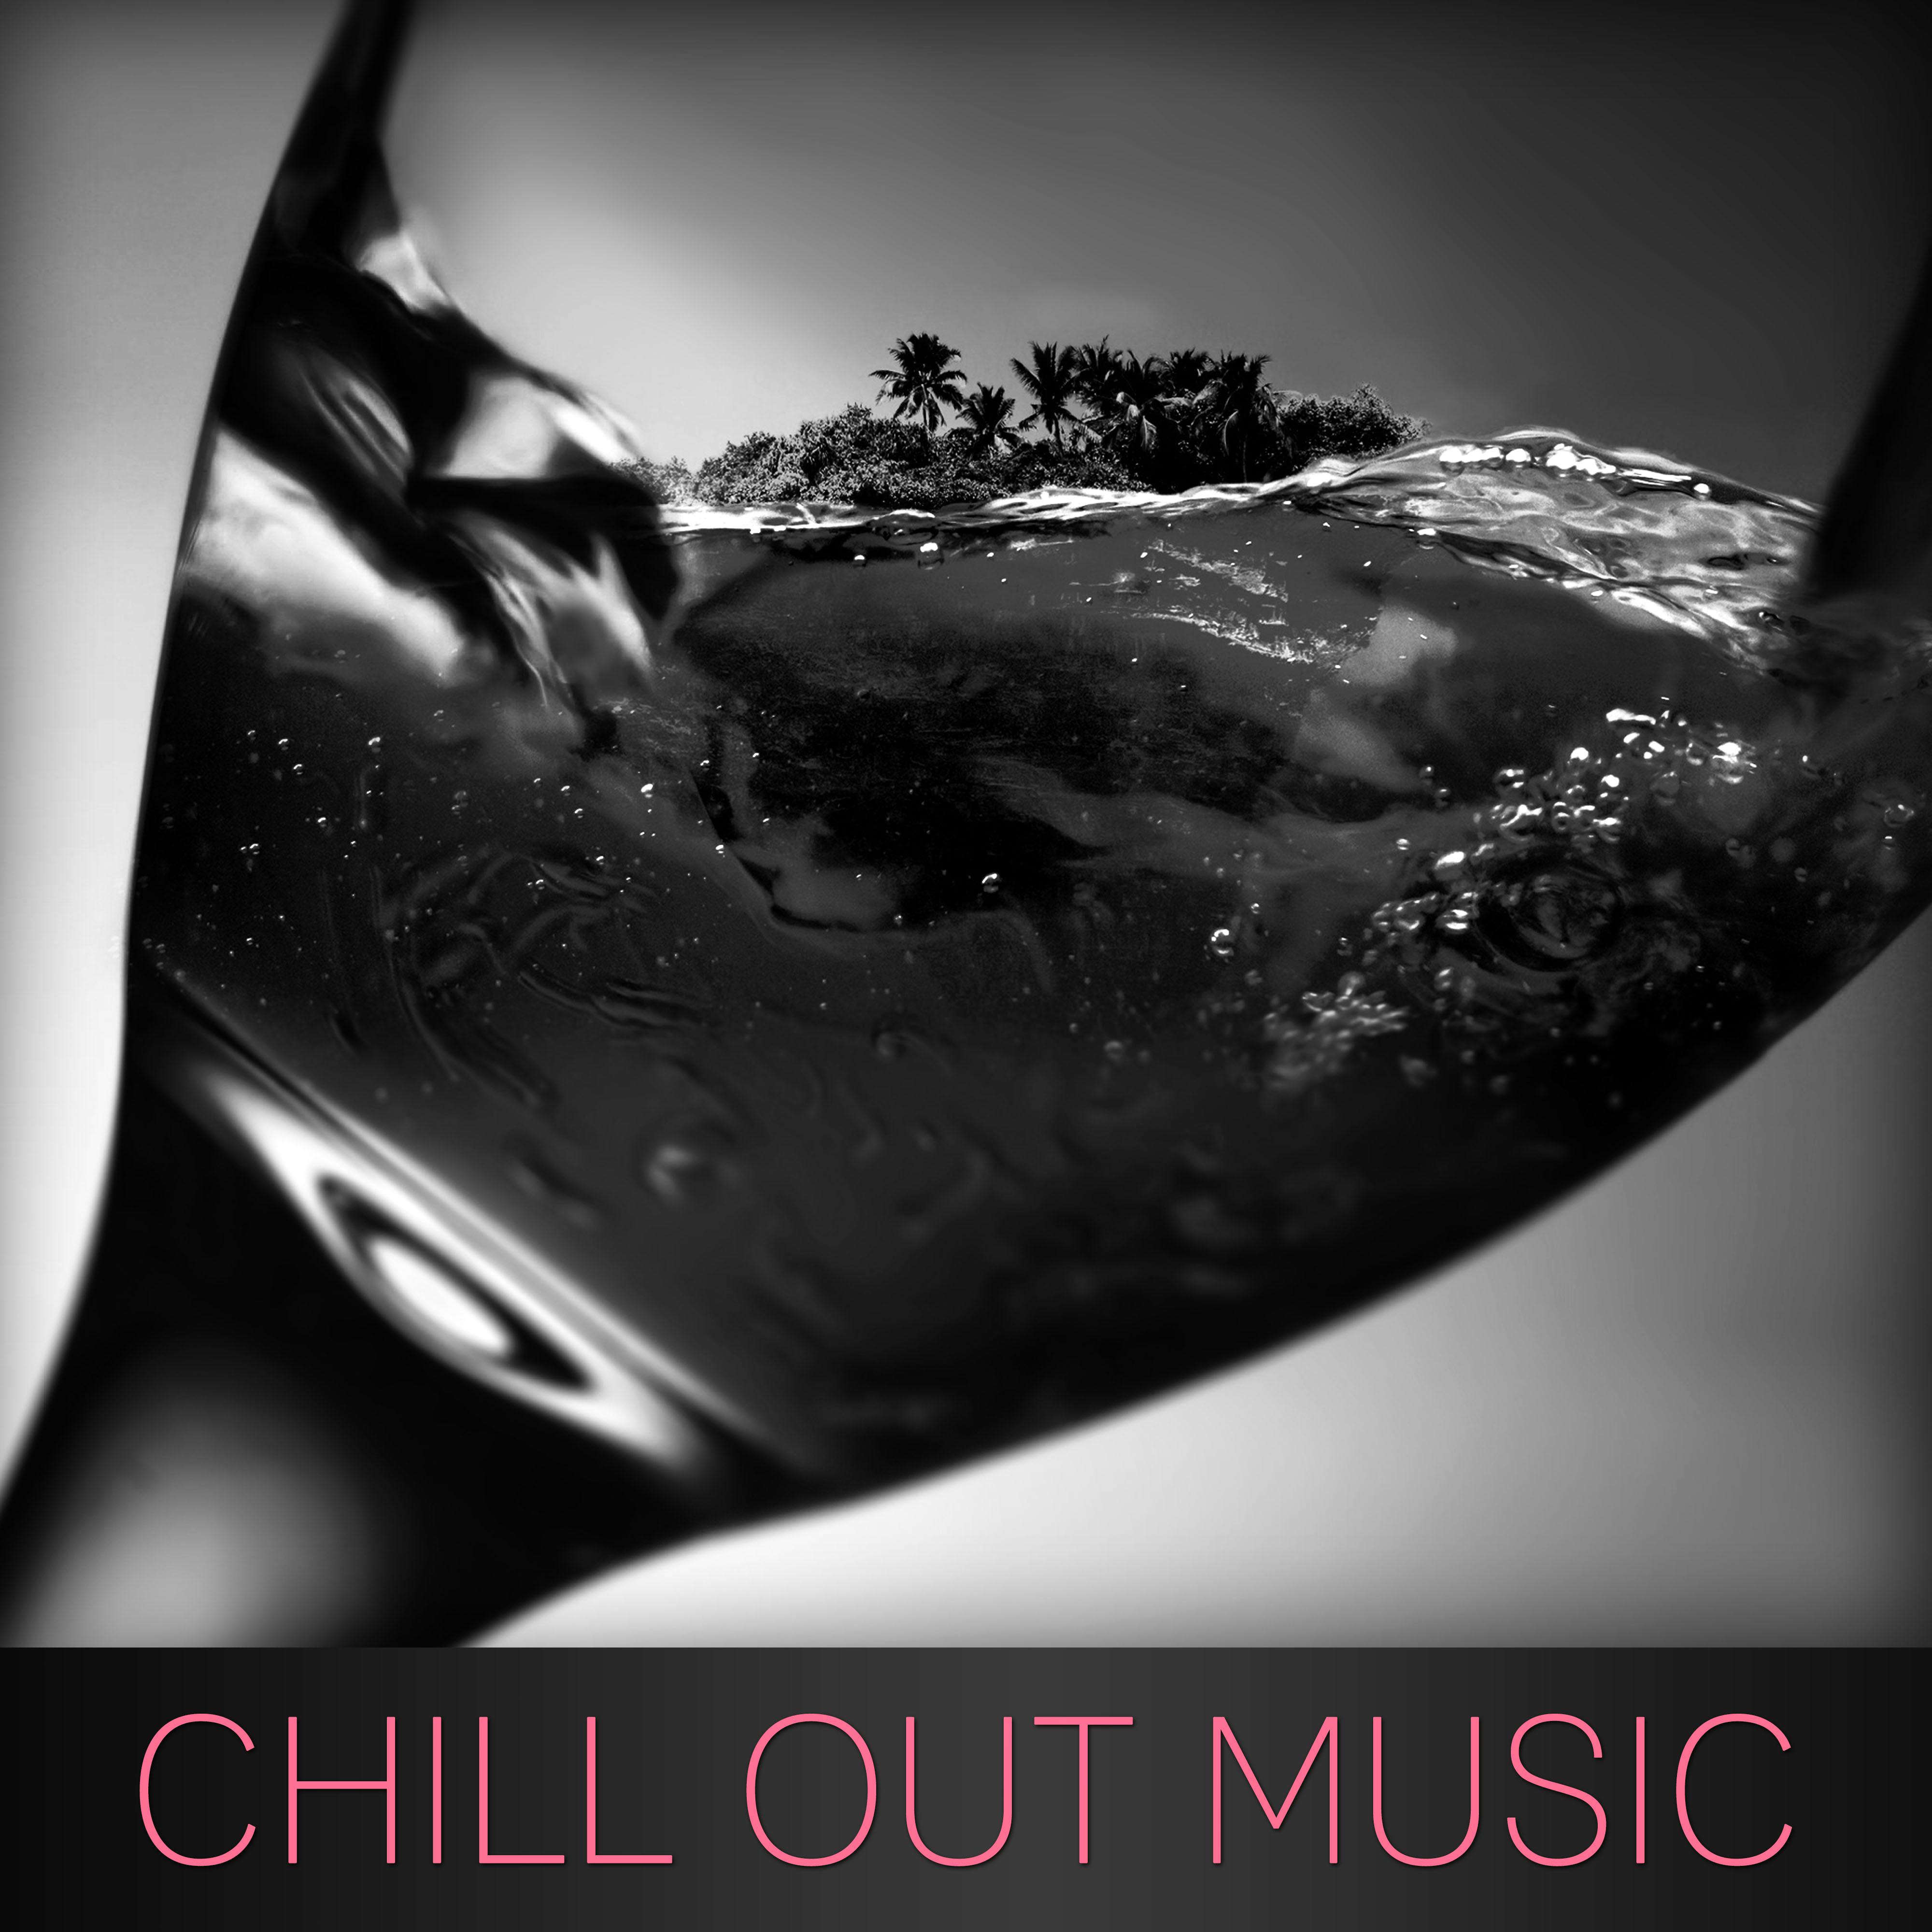 Chill Out Music - The Best Chillout Music, Lounge Summer, Beach Party, Holidays Sounds, Summer Solstice